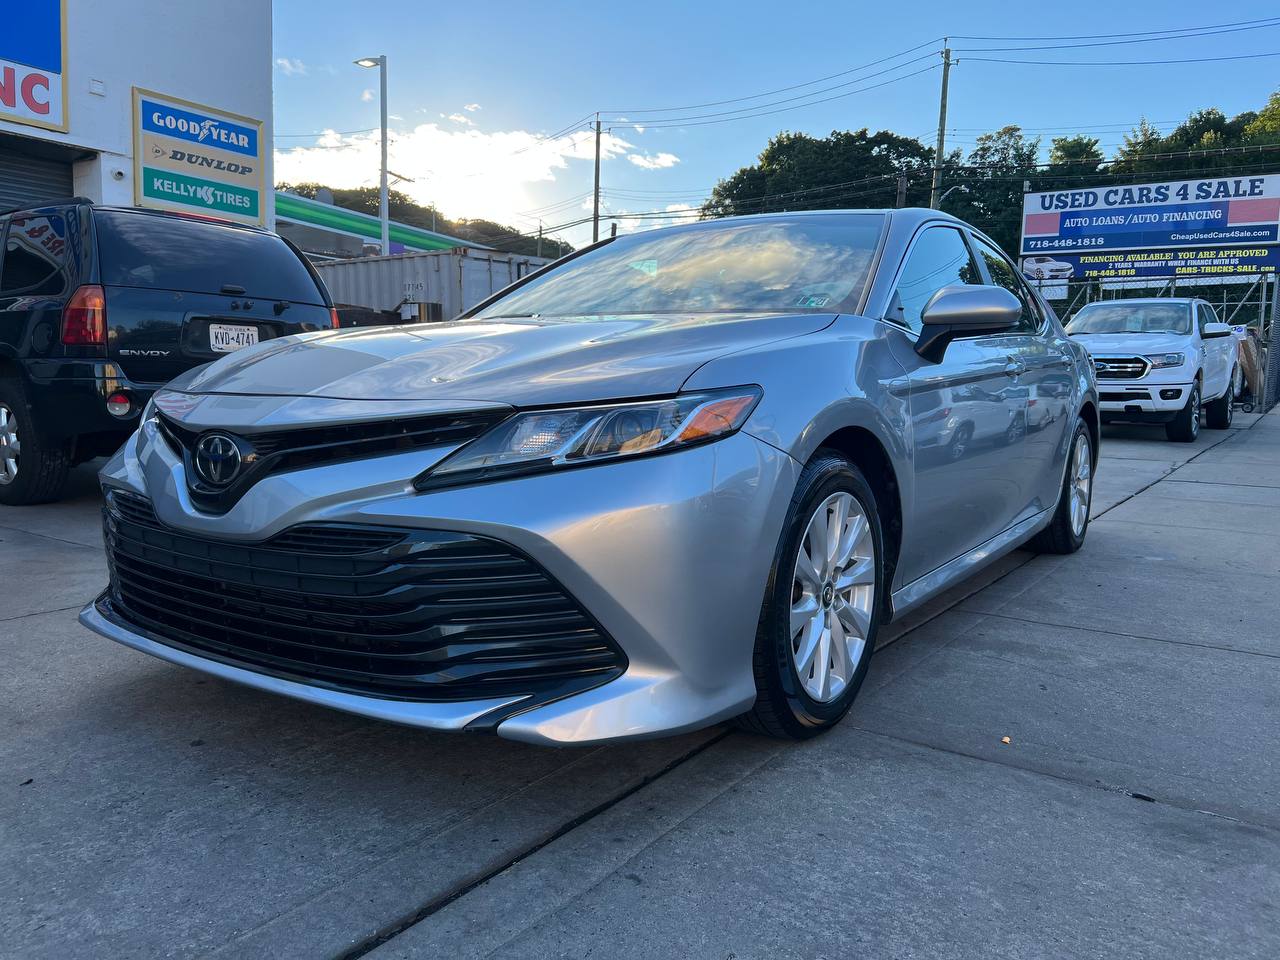 Used Car - 2019 Toyota Camry LE for Sale in Staten Island, NY